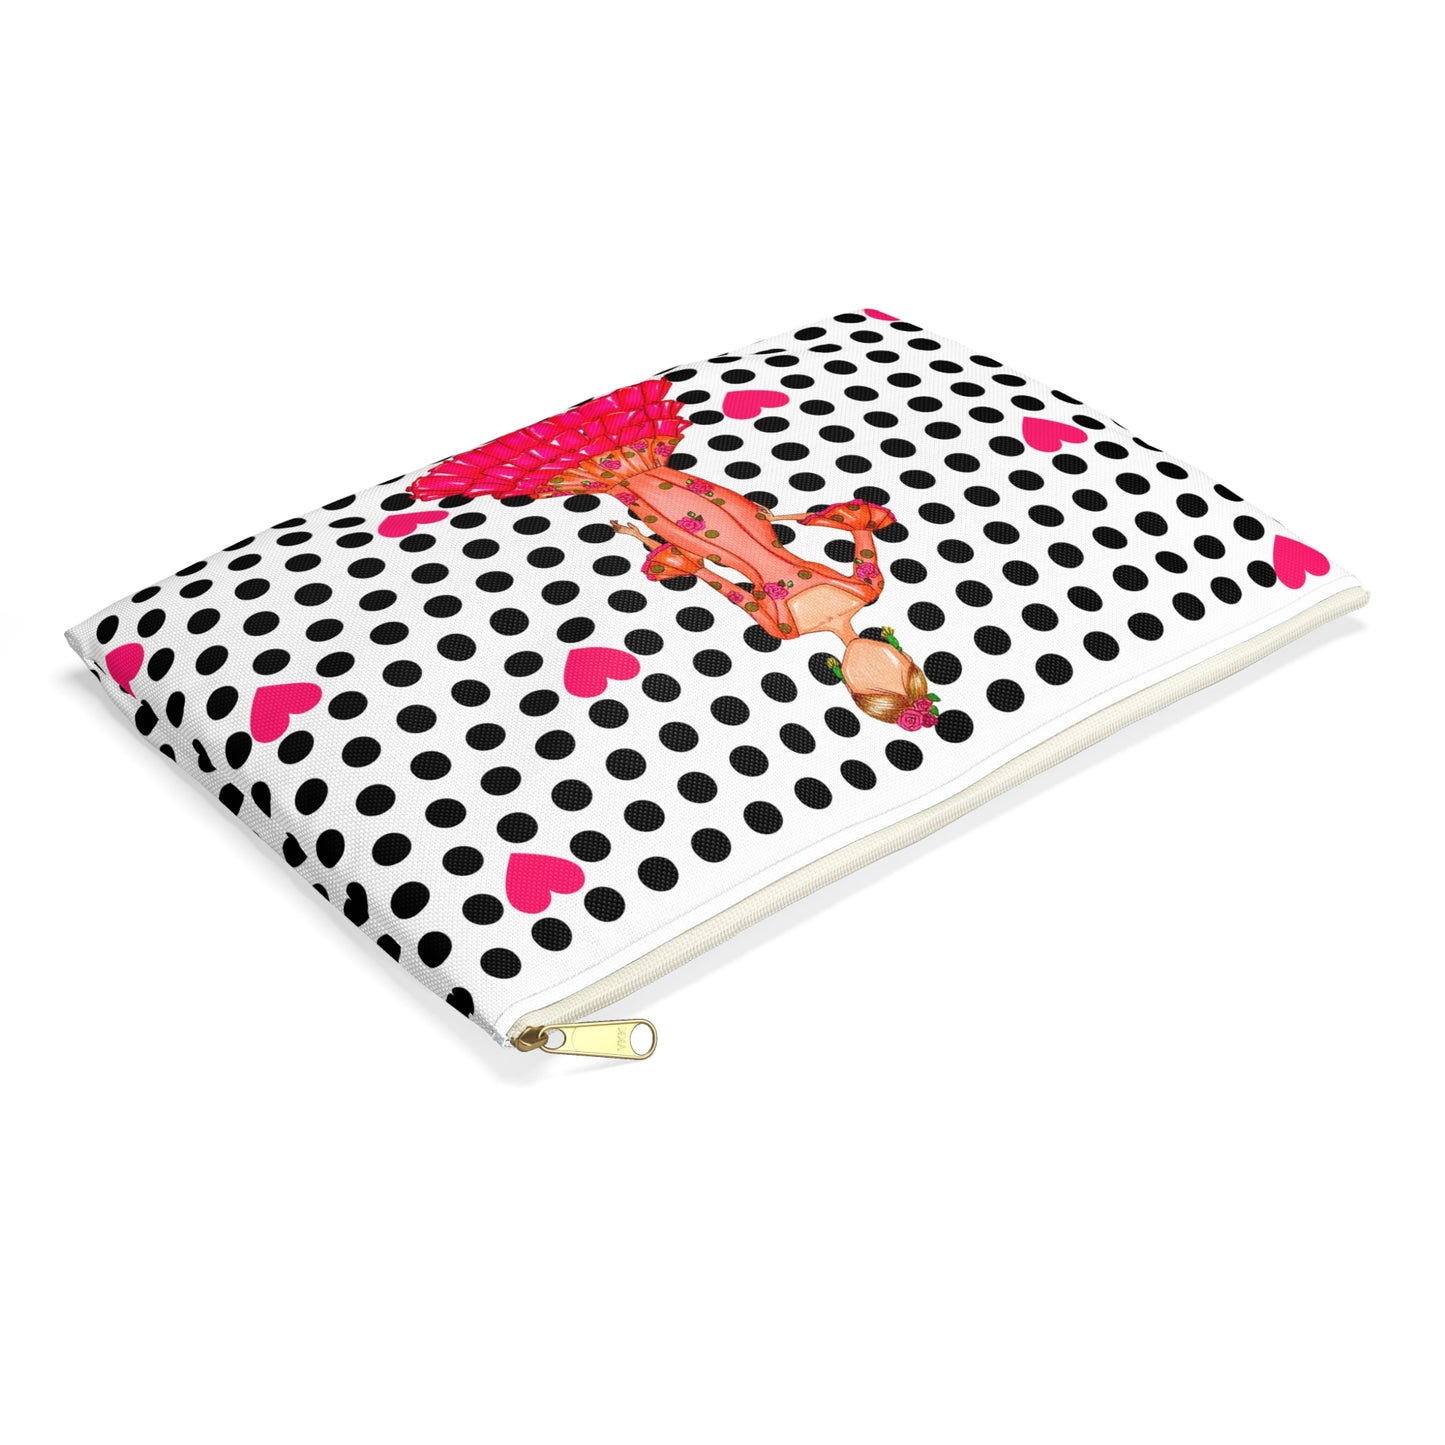 a black and white polka dot notebook with a cartoon character on it